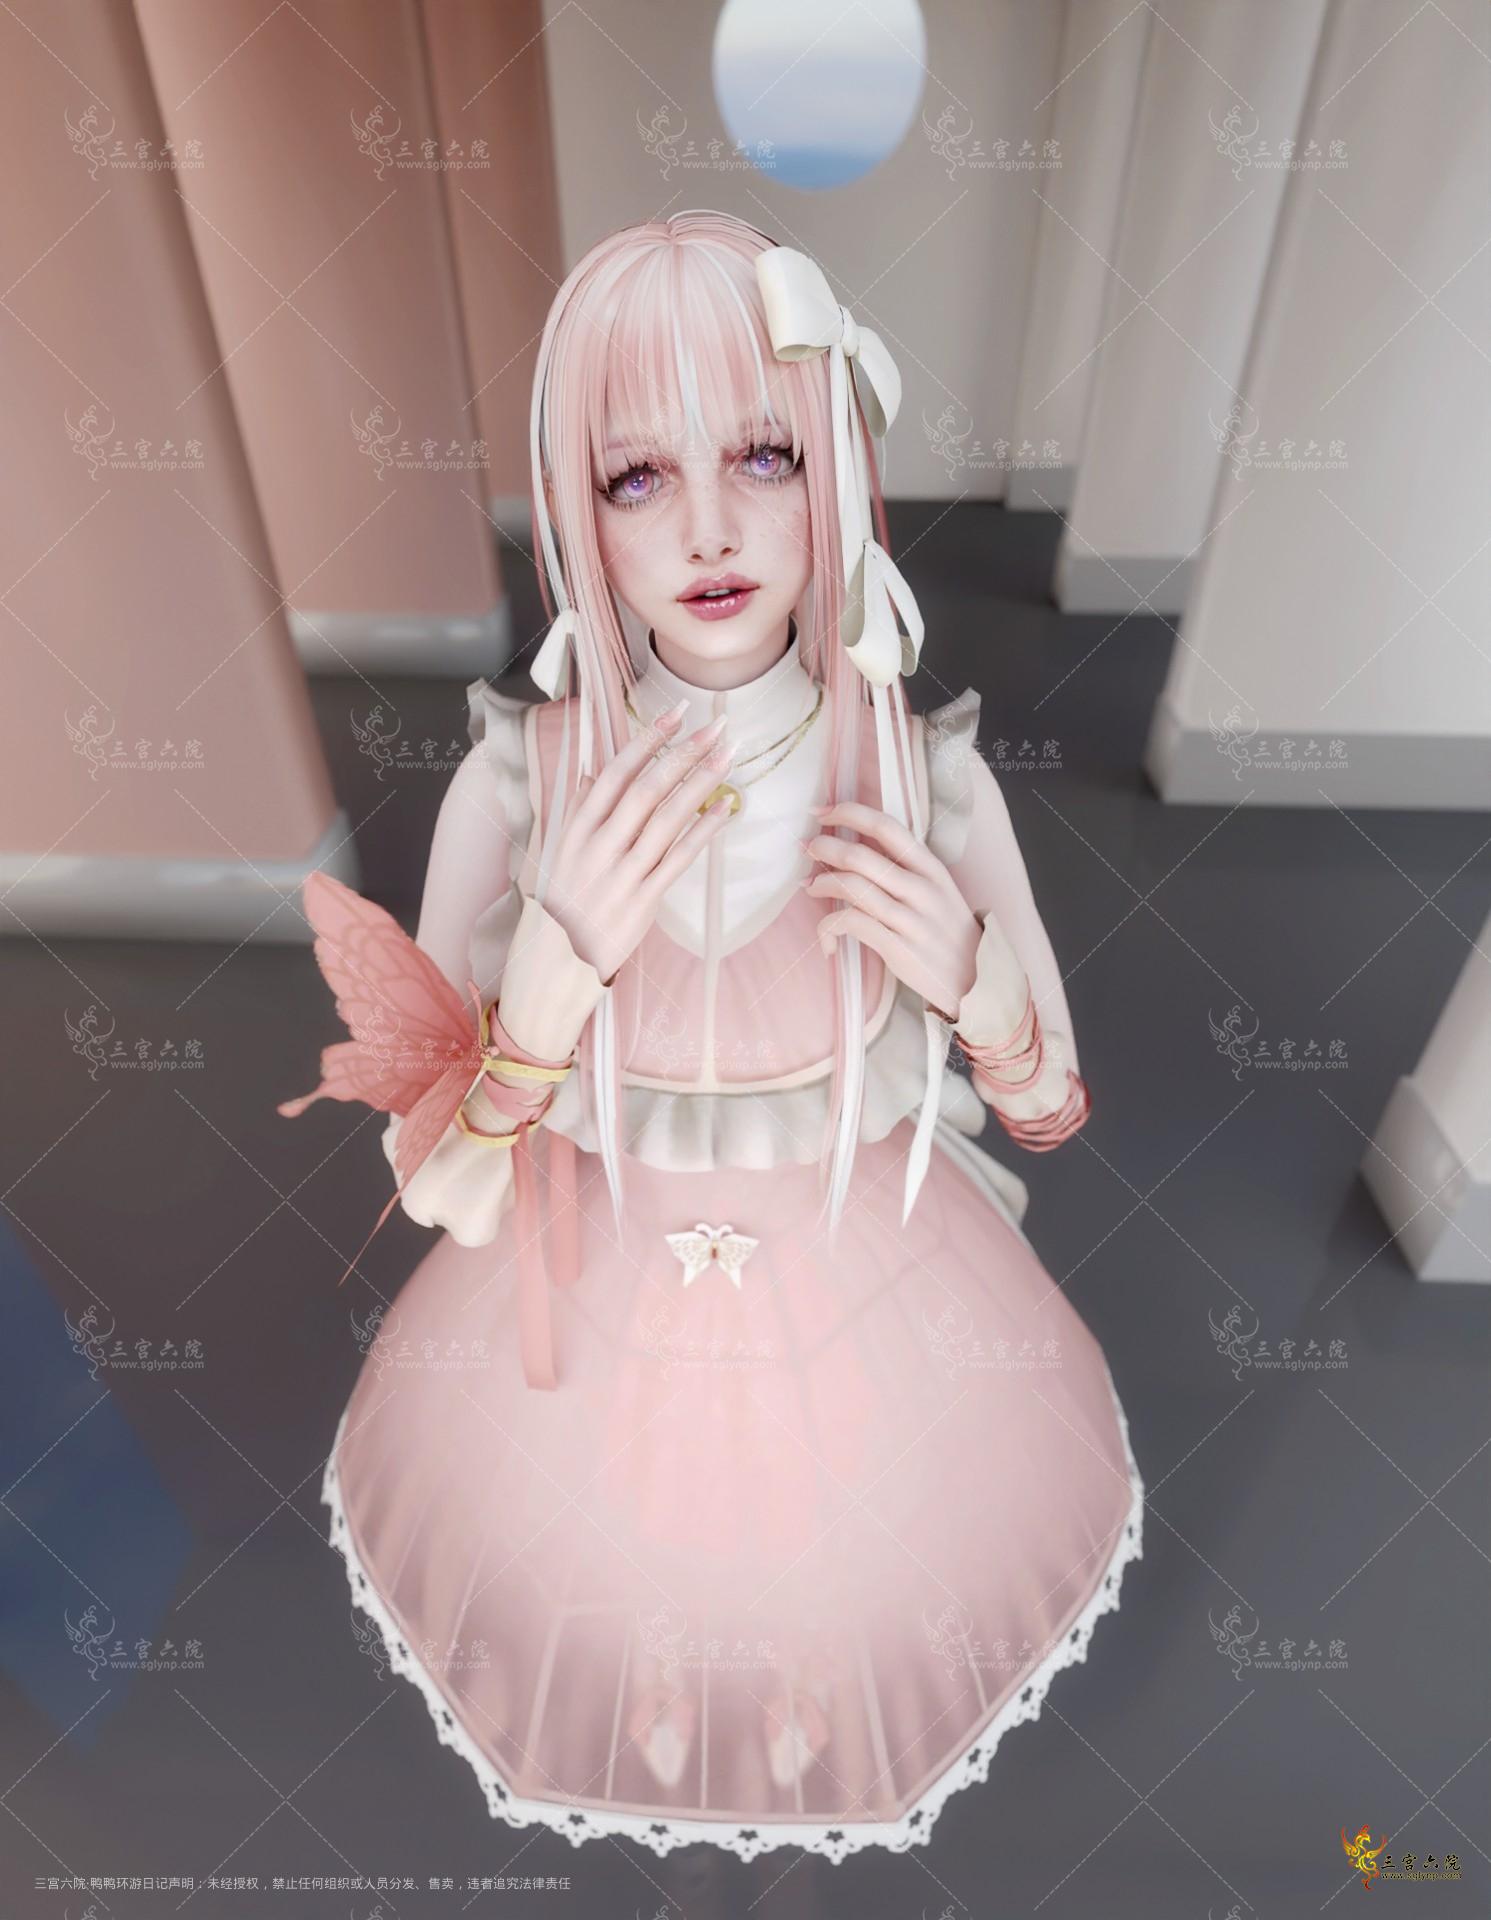 Butterfly Lolita preview3.png